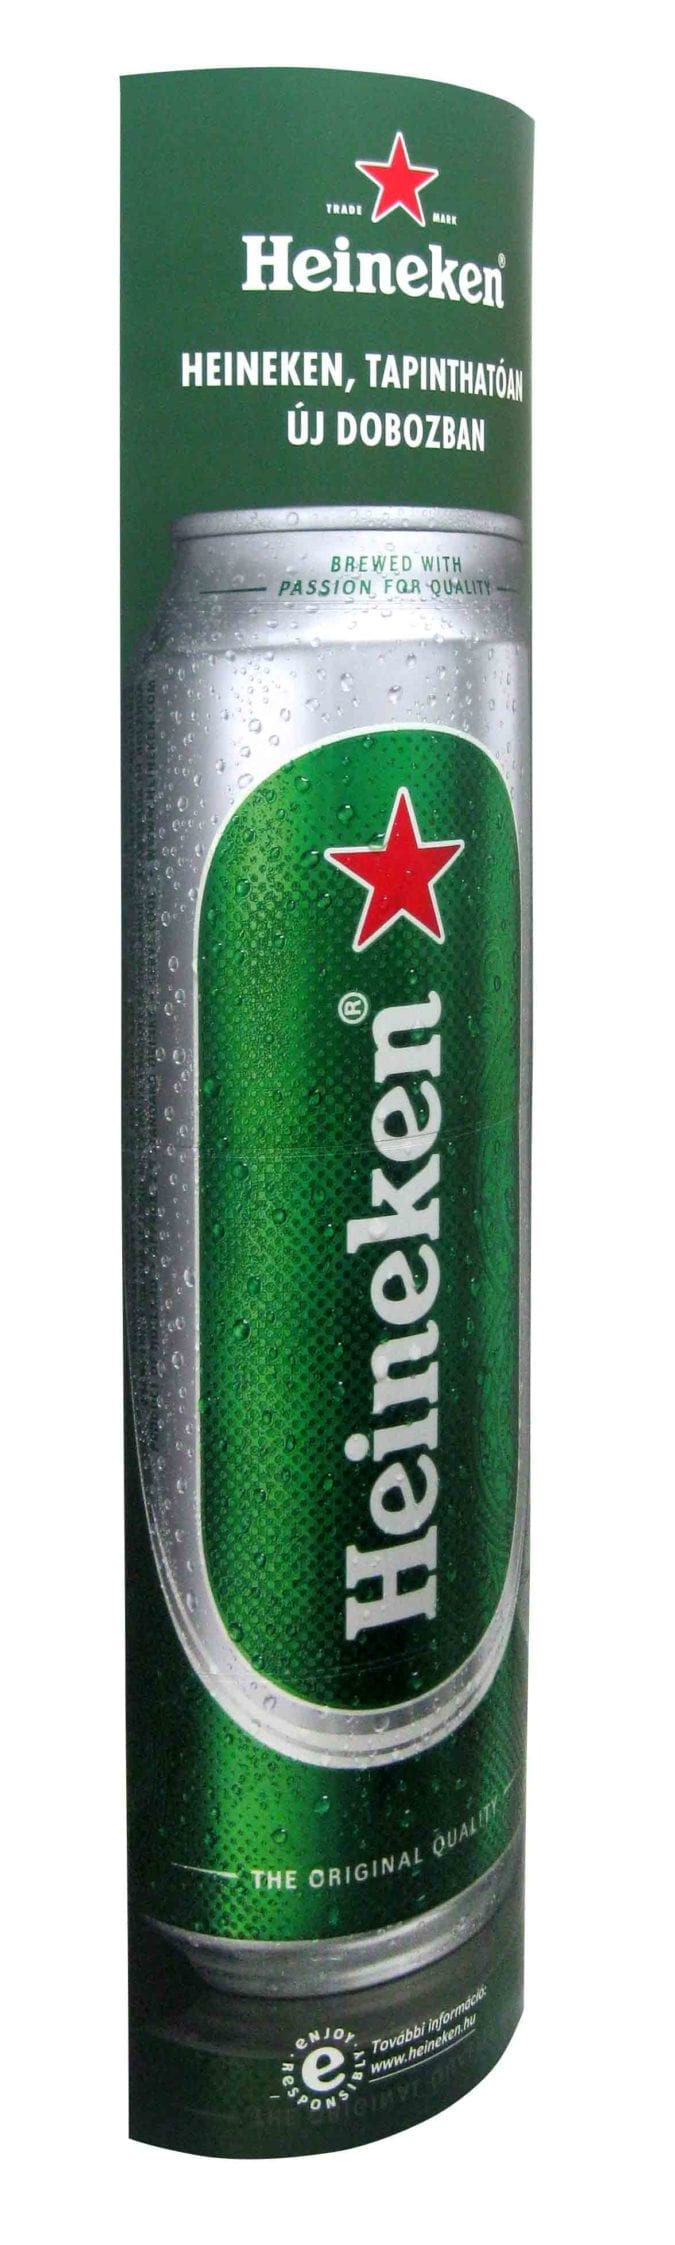 Elips_Heineken This is not just another cardboard, retail sign. This patented system is quick and easy to assemble. It’s foldable and economical to ship. Our high quality graphic print capabilities and graphic design team allow us to fully customize each display for your specific needs. We offer multiple sizes and all of our corrugated displays and signs are made from sustainable and recyclable materials. The Flash Totem is a great value for little cost. We offer the best in-store, point of purchase signs and displays on the market today. We can help you come up with a design that will make an impact in retail stores everywhere and maximize your ROI. Contact us today to get your free quote at https://www.landaal.com